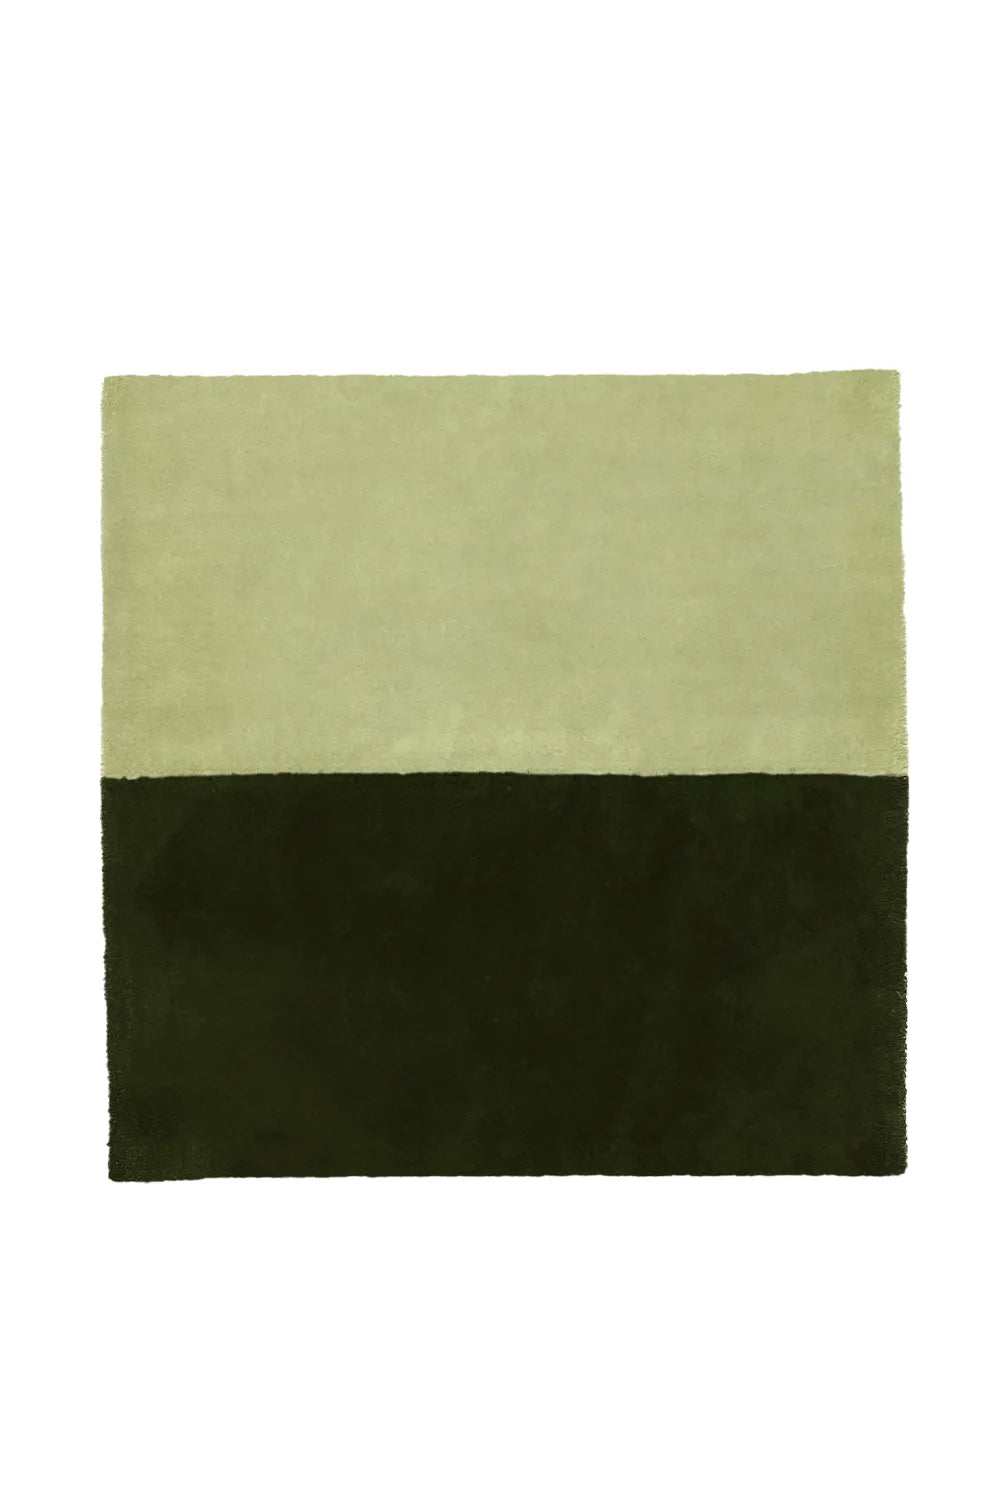 Color Block Square Tufted Rug